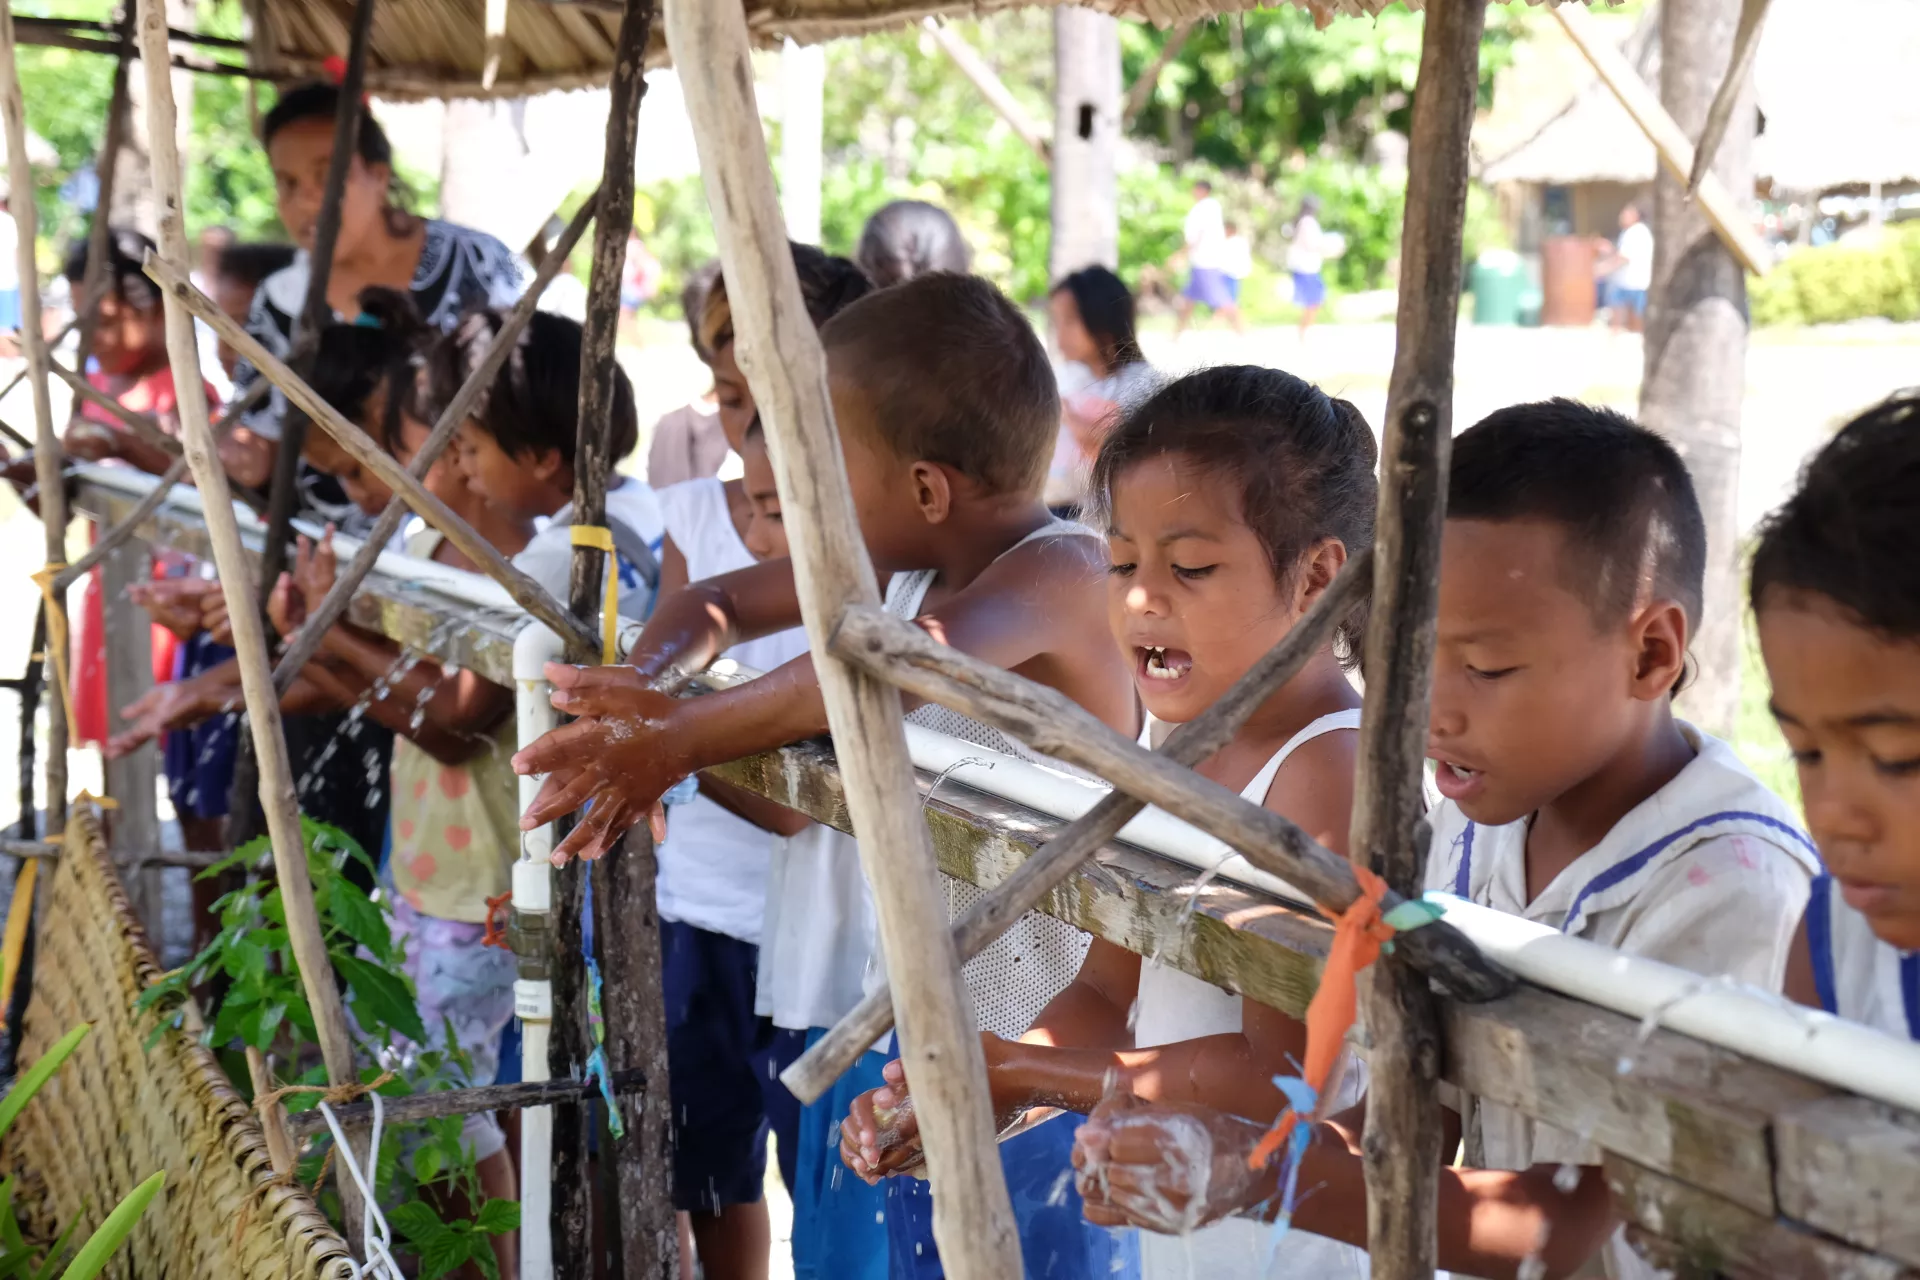 Young children in Kiribati wash their hands outside in 2019.